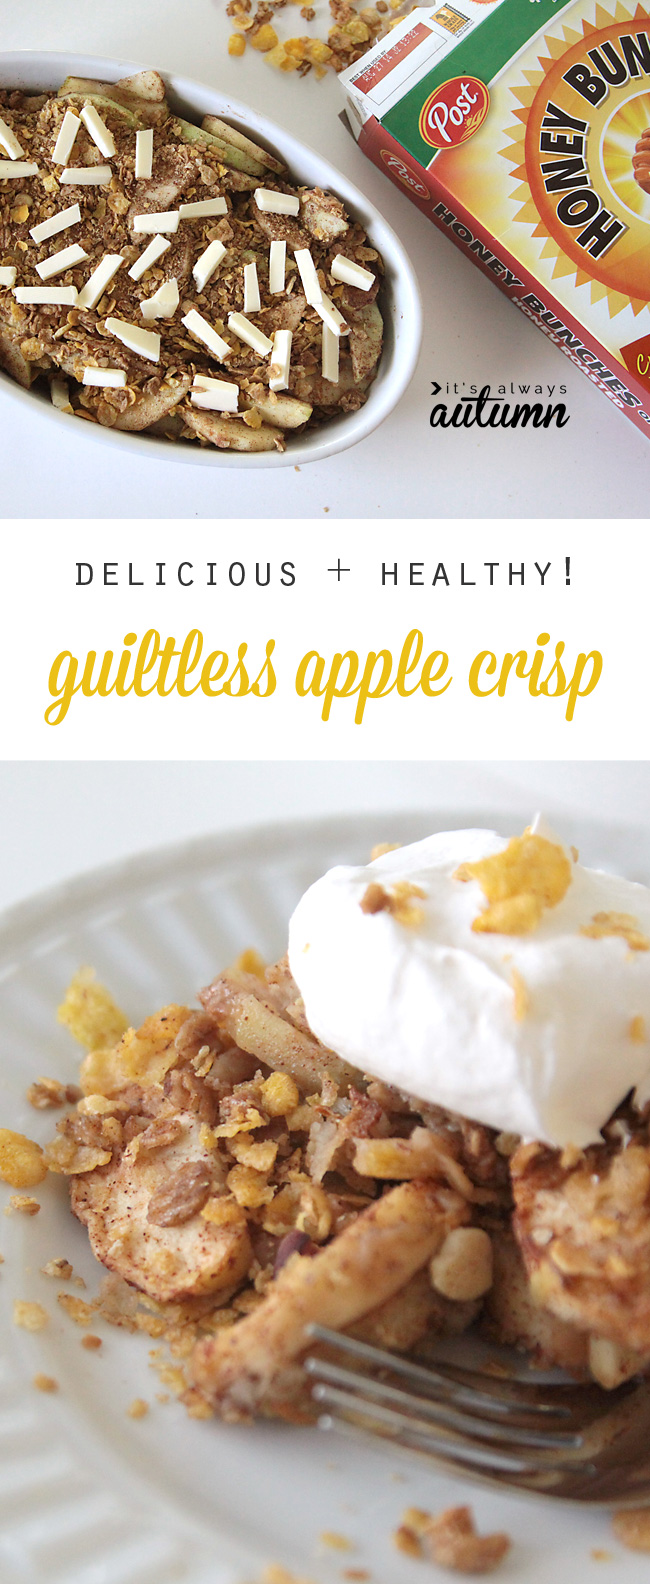 guiltless apple crisp made with Honey Bunches of oats cereal